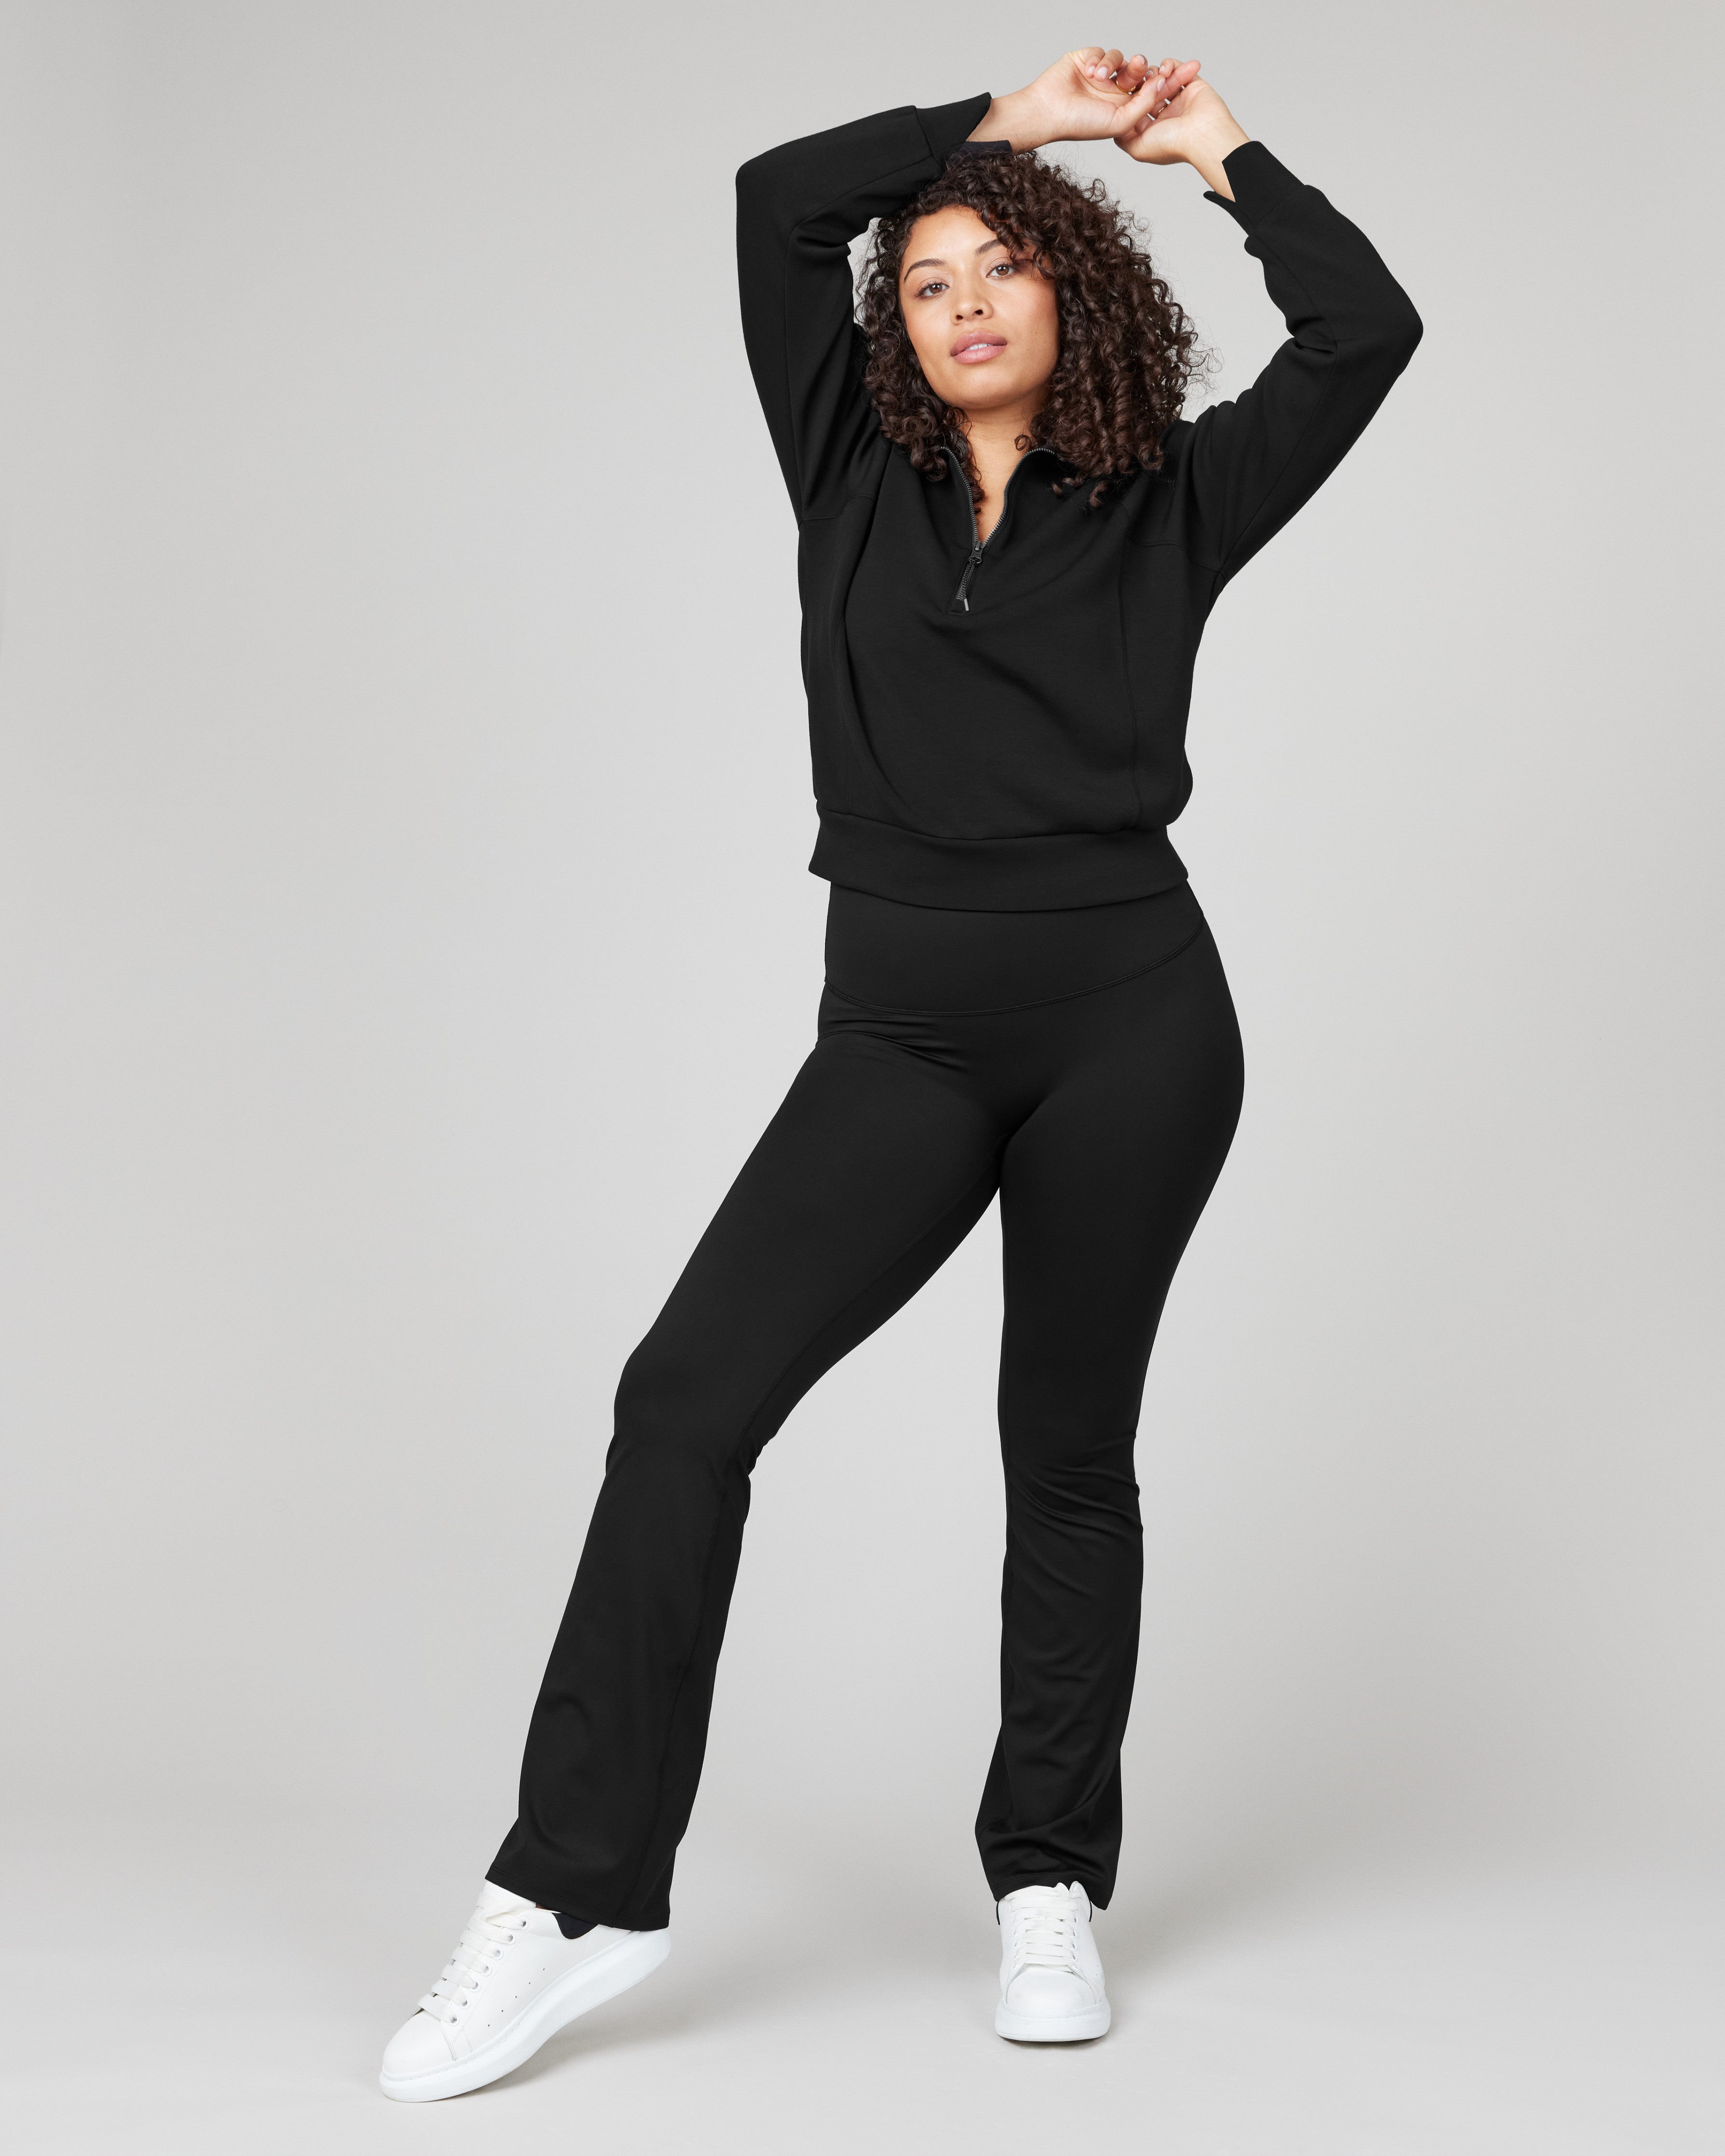 SPANX - Introducing The PERFECT Black Pant Collection. Designed with  buttery-soft fabric, pull-on design, and hidden shaping. Available in  petite and tall in 4 styles.